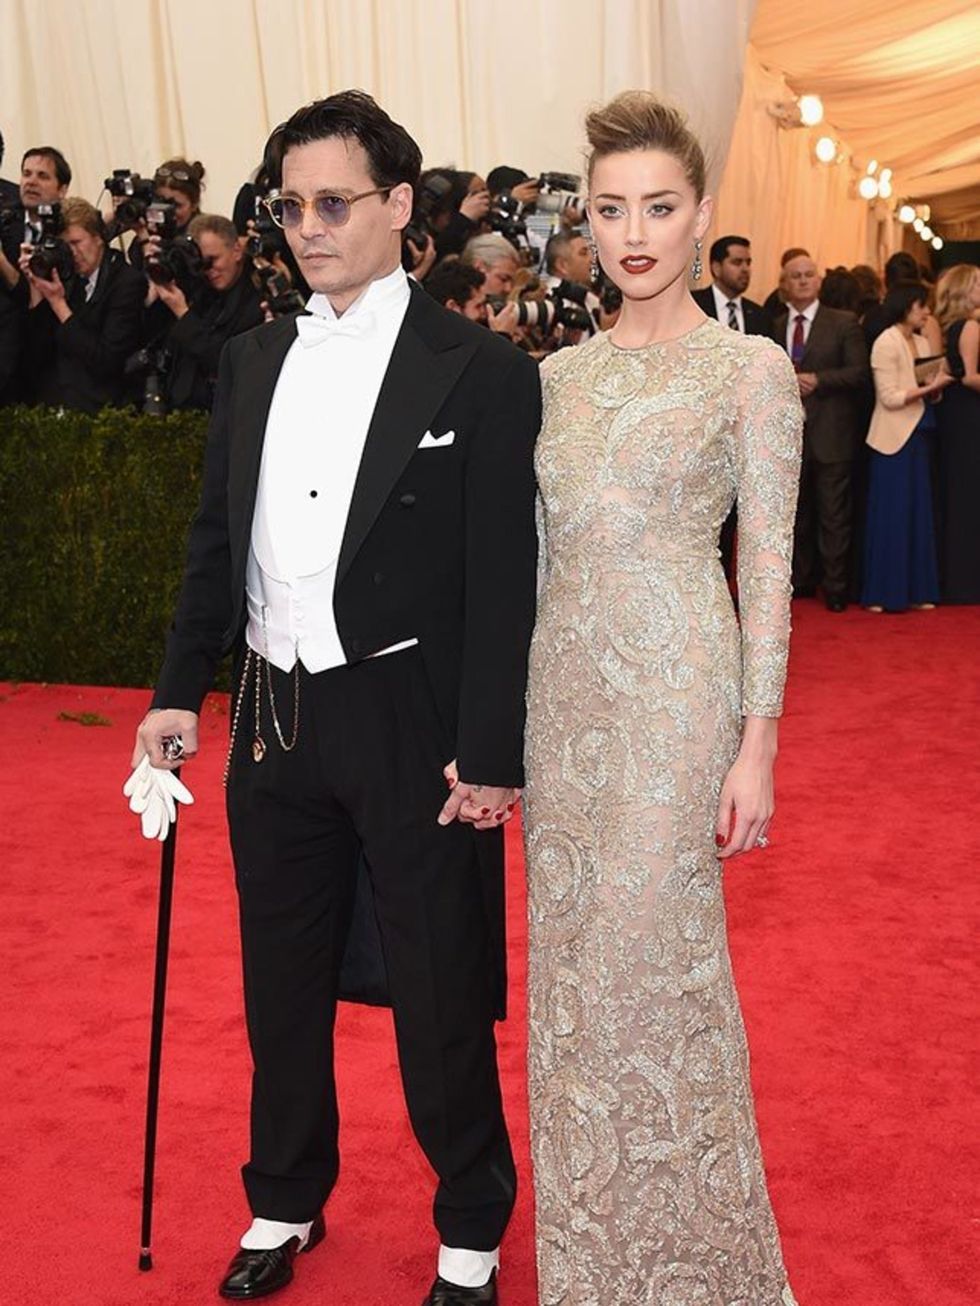 2014_amber_heard_johnny_depp_and_former_lovers_getty_gallery_13